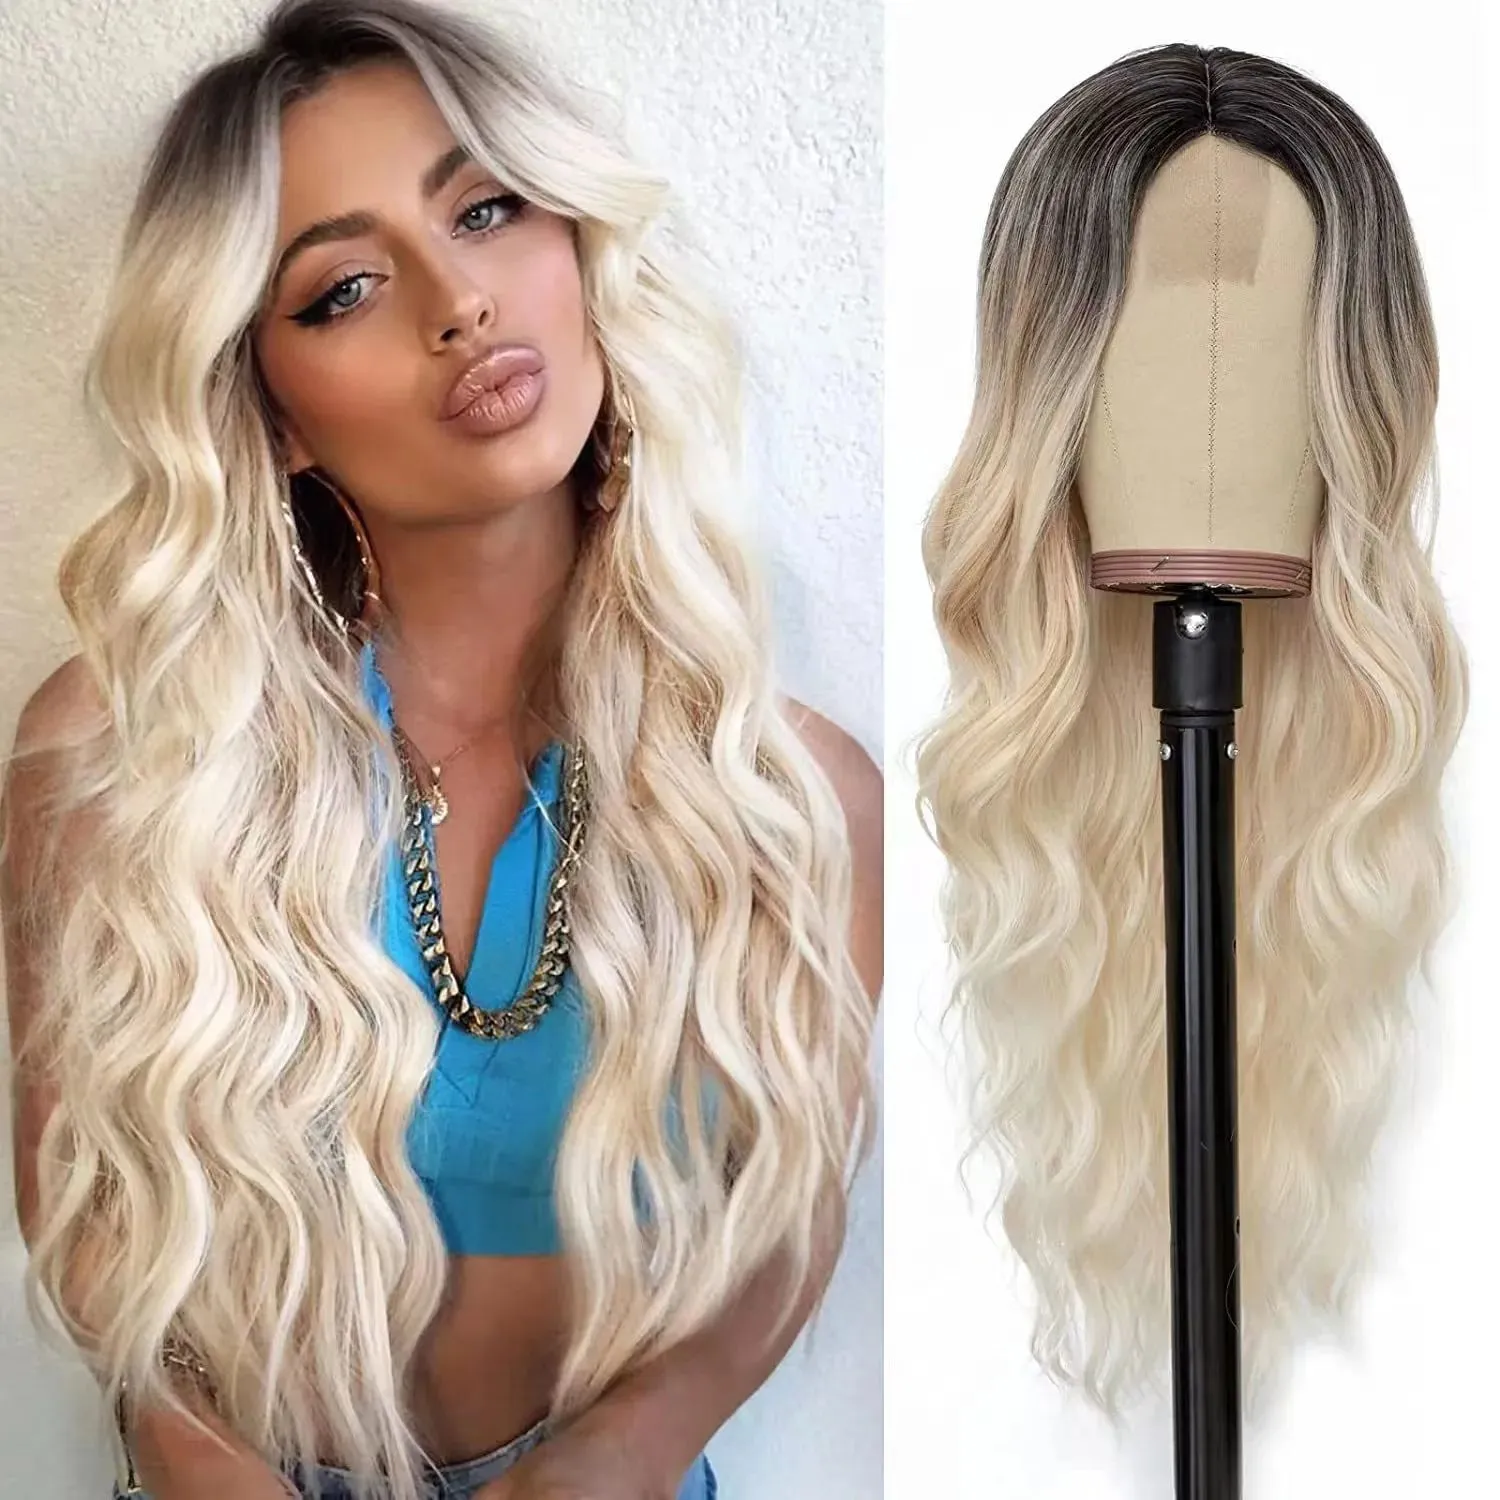 Long Deep Wave Full Lace Front Wigs Human Hair curly hair 10 styles wigs female lace wigs synthetic natural hair lace wigs fast